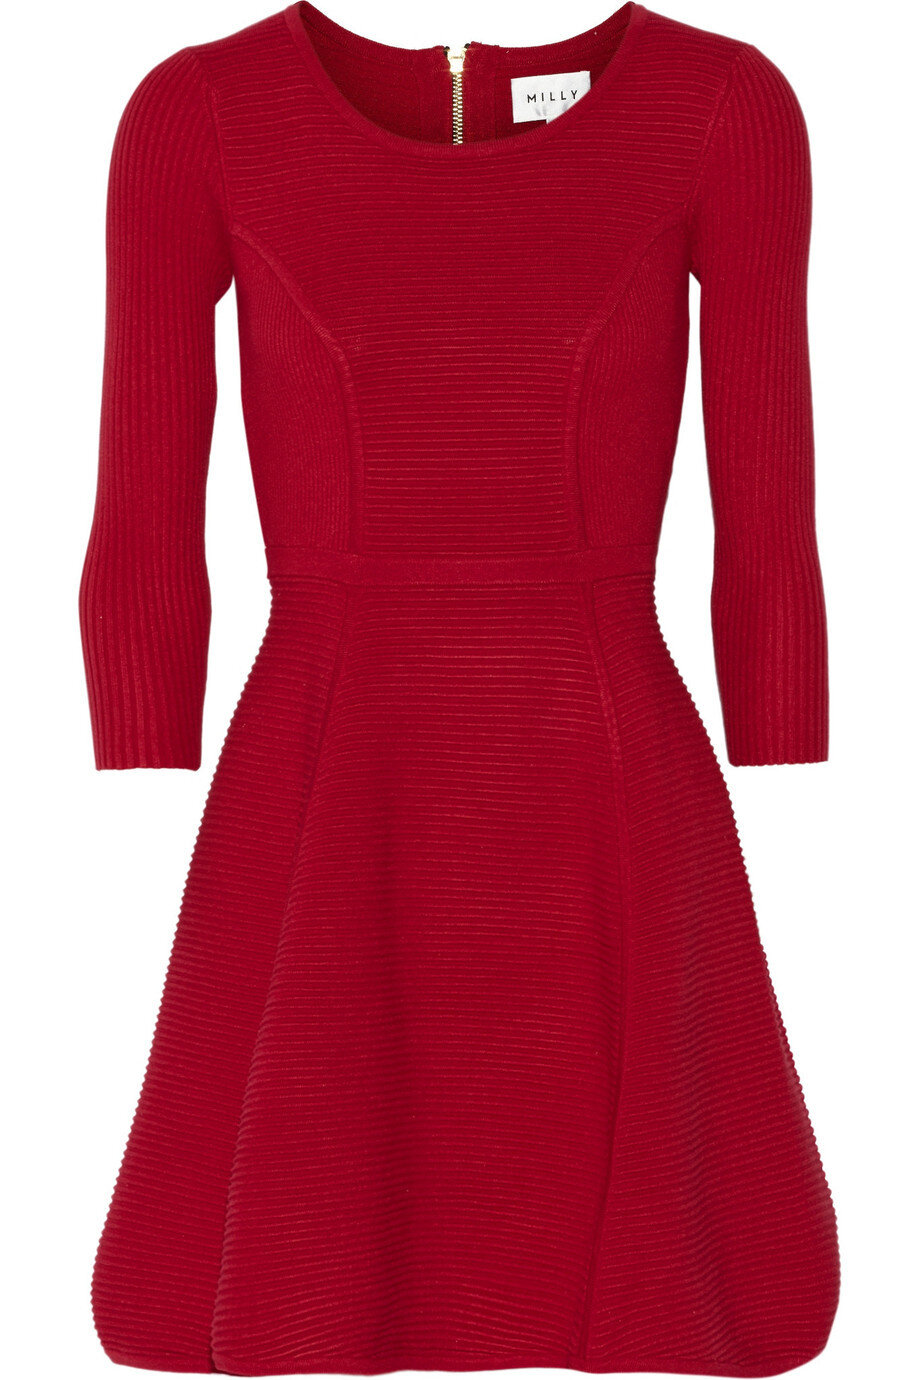 Milly Ribbed-Knit Dress in Red.jpg